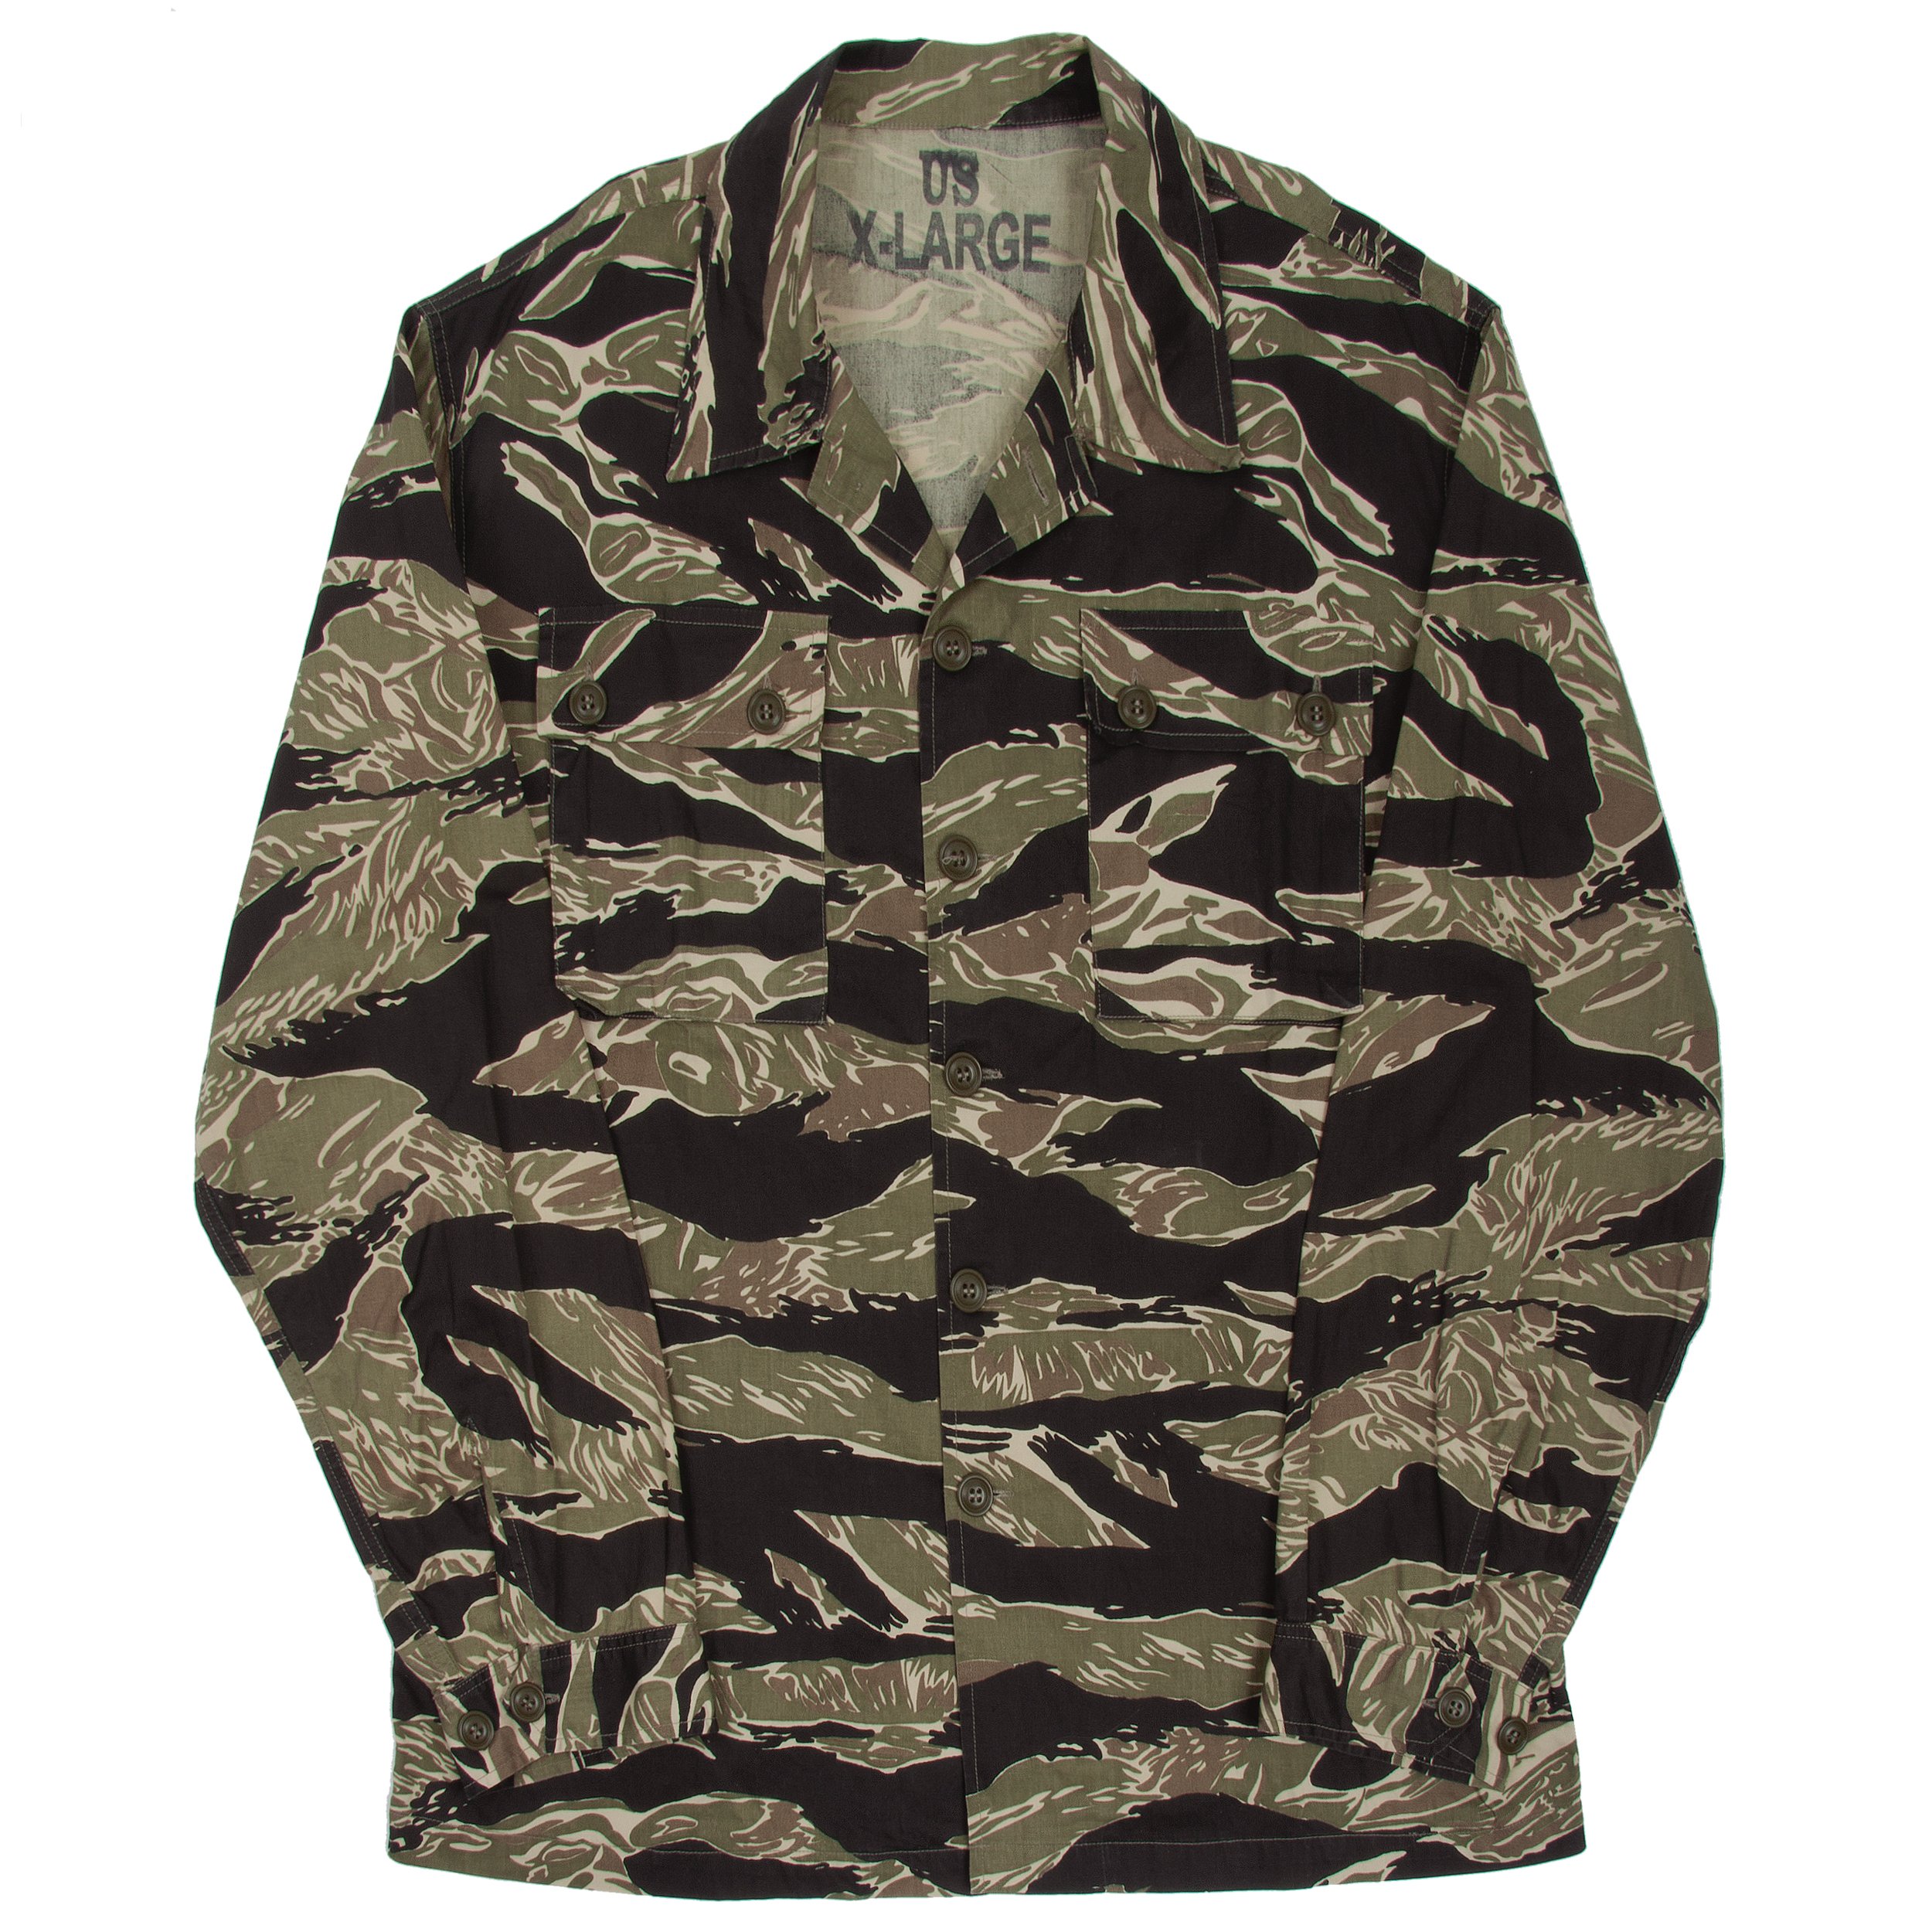 G-Style USA Men's Victorious Distressed Tiger Stripe Camo Jean Jacket